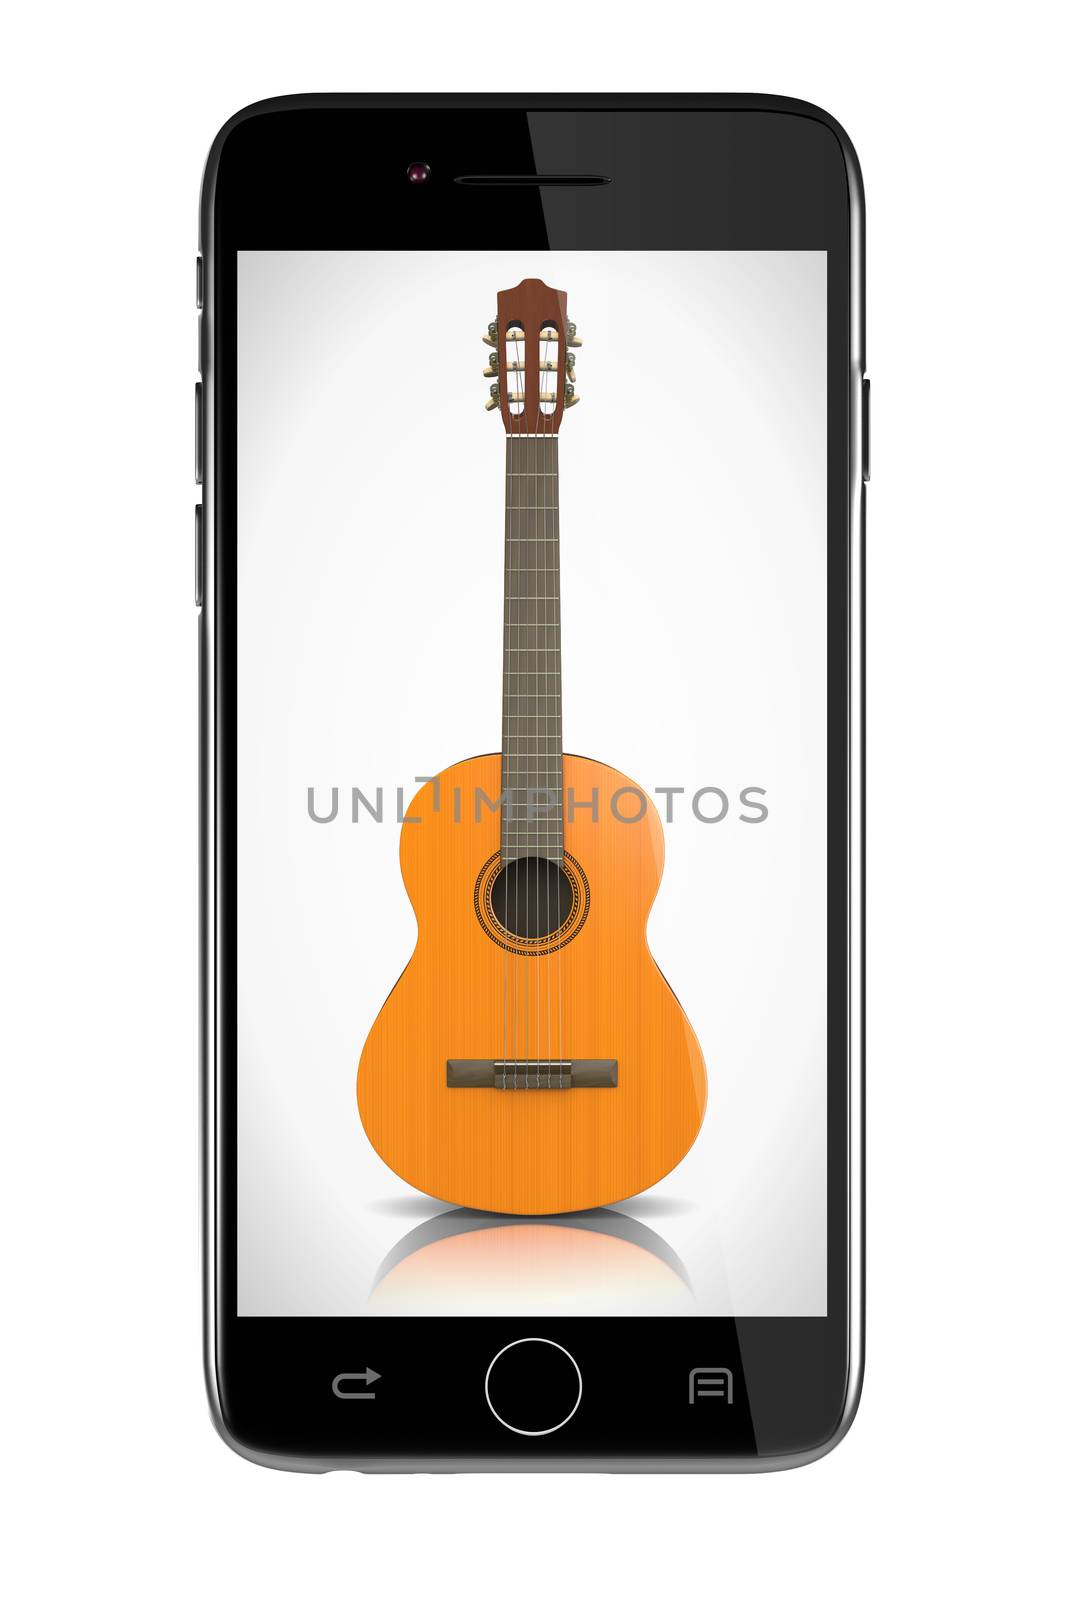 Smartphone Showing a Classical Guitar on White Background Illustration